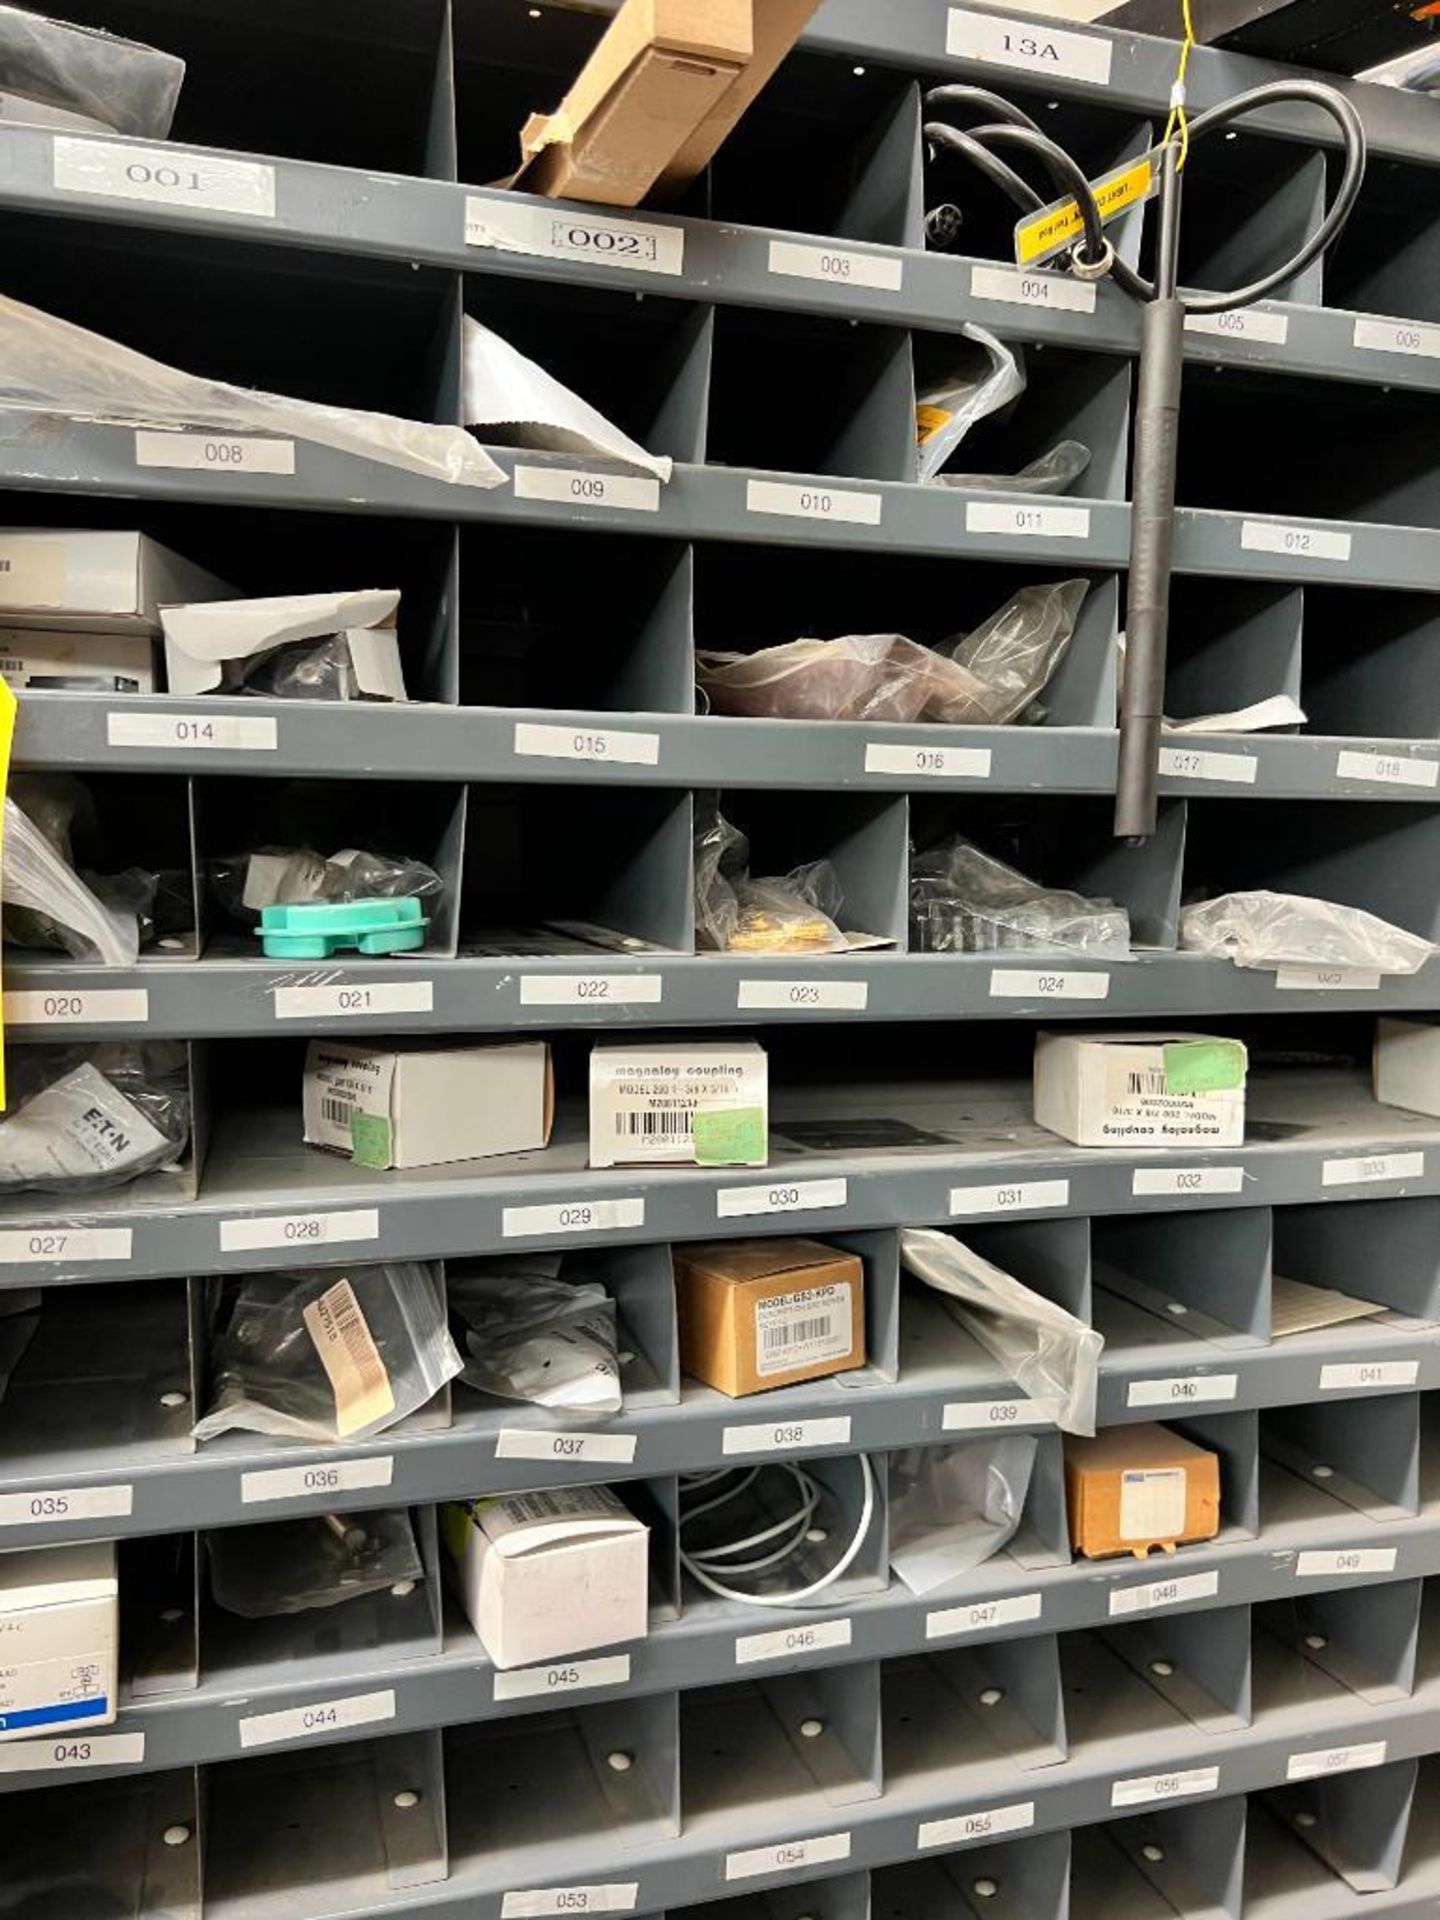 (28) Shelves of Assorted Parts, VERY LARGE LOT Consisting of MRO, Drives, Valves, PLC, Nuts, Bolts, - Image 21 of 67